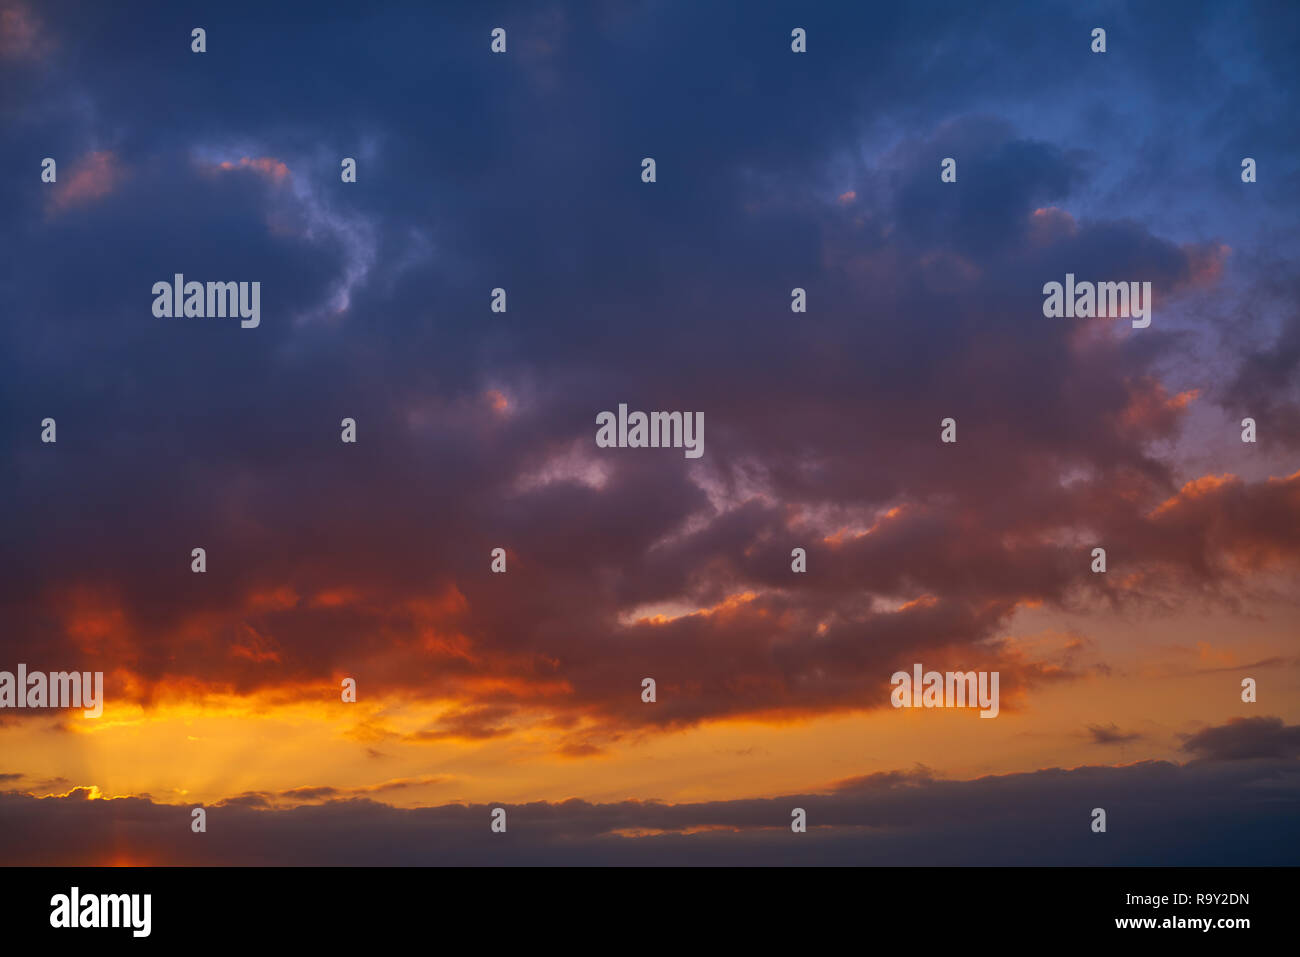 Sunset sky clouds orange and blue colors Stock Photo